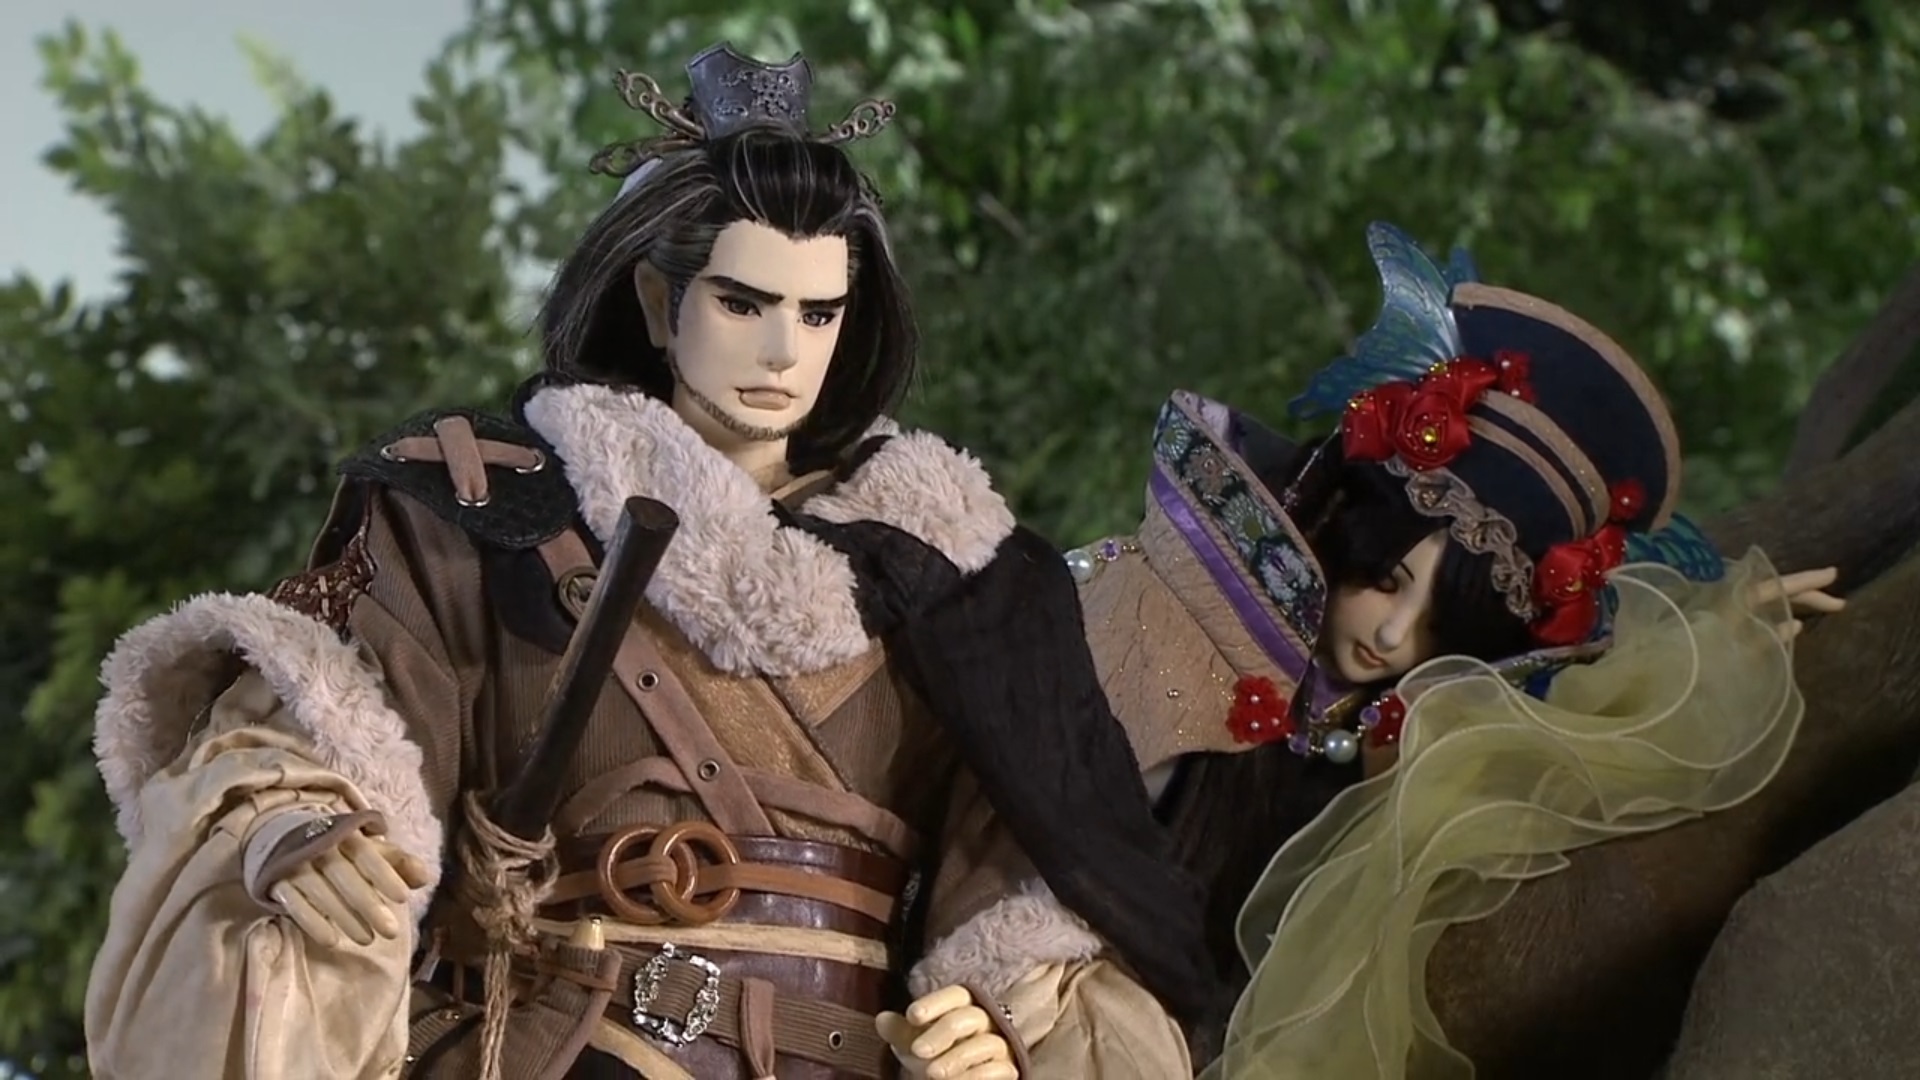 Shang Bu Huan assists an exhausted and injured Dan Fei in a scene from the Thunderbolt Fantasy glove-puppetry wuxia TV series.